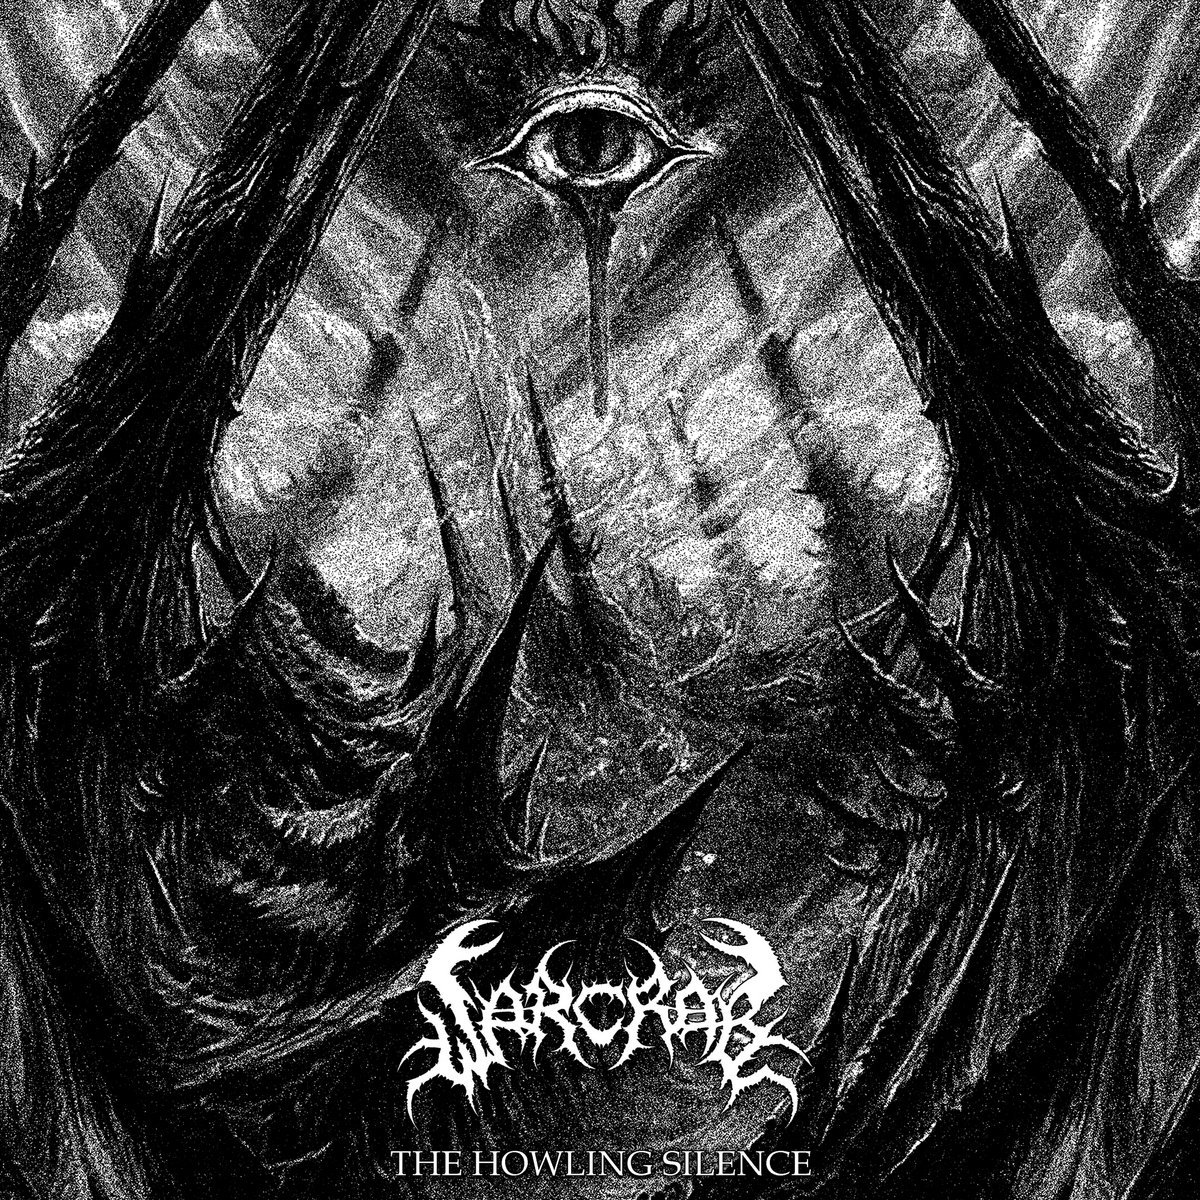 Image of Warcrab – The Howling Silence DigiCD